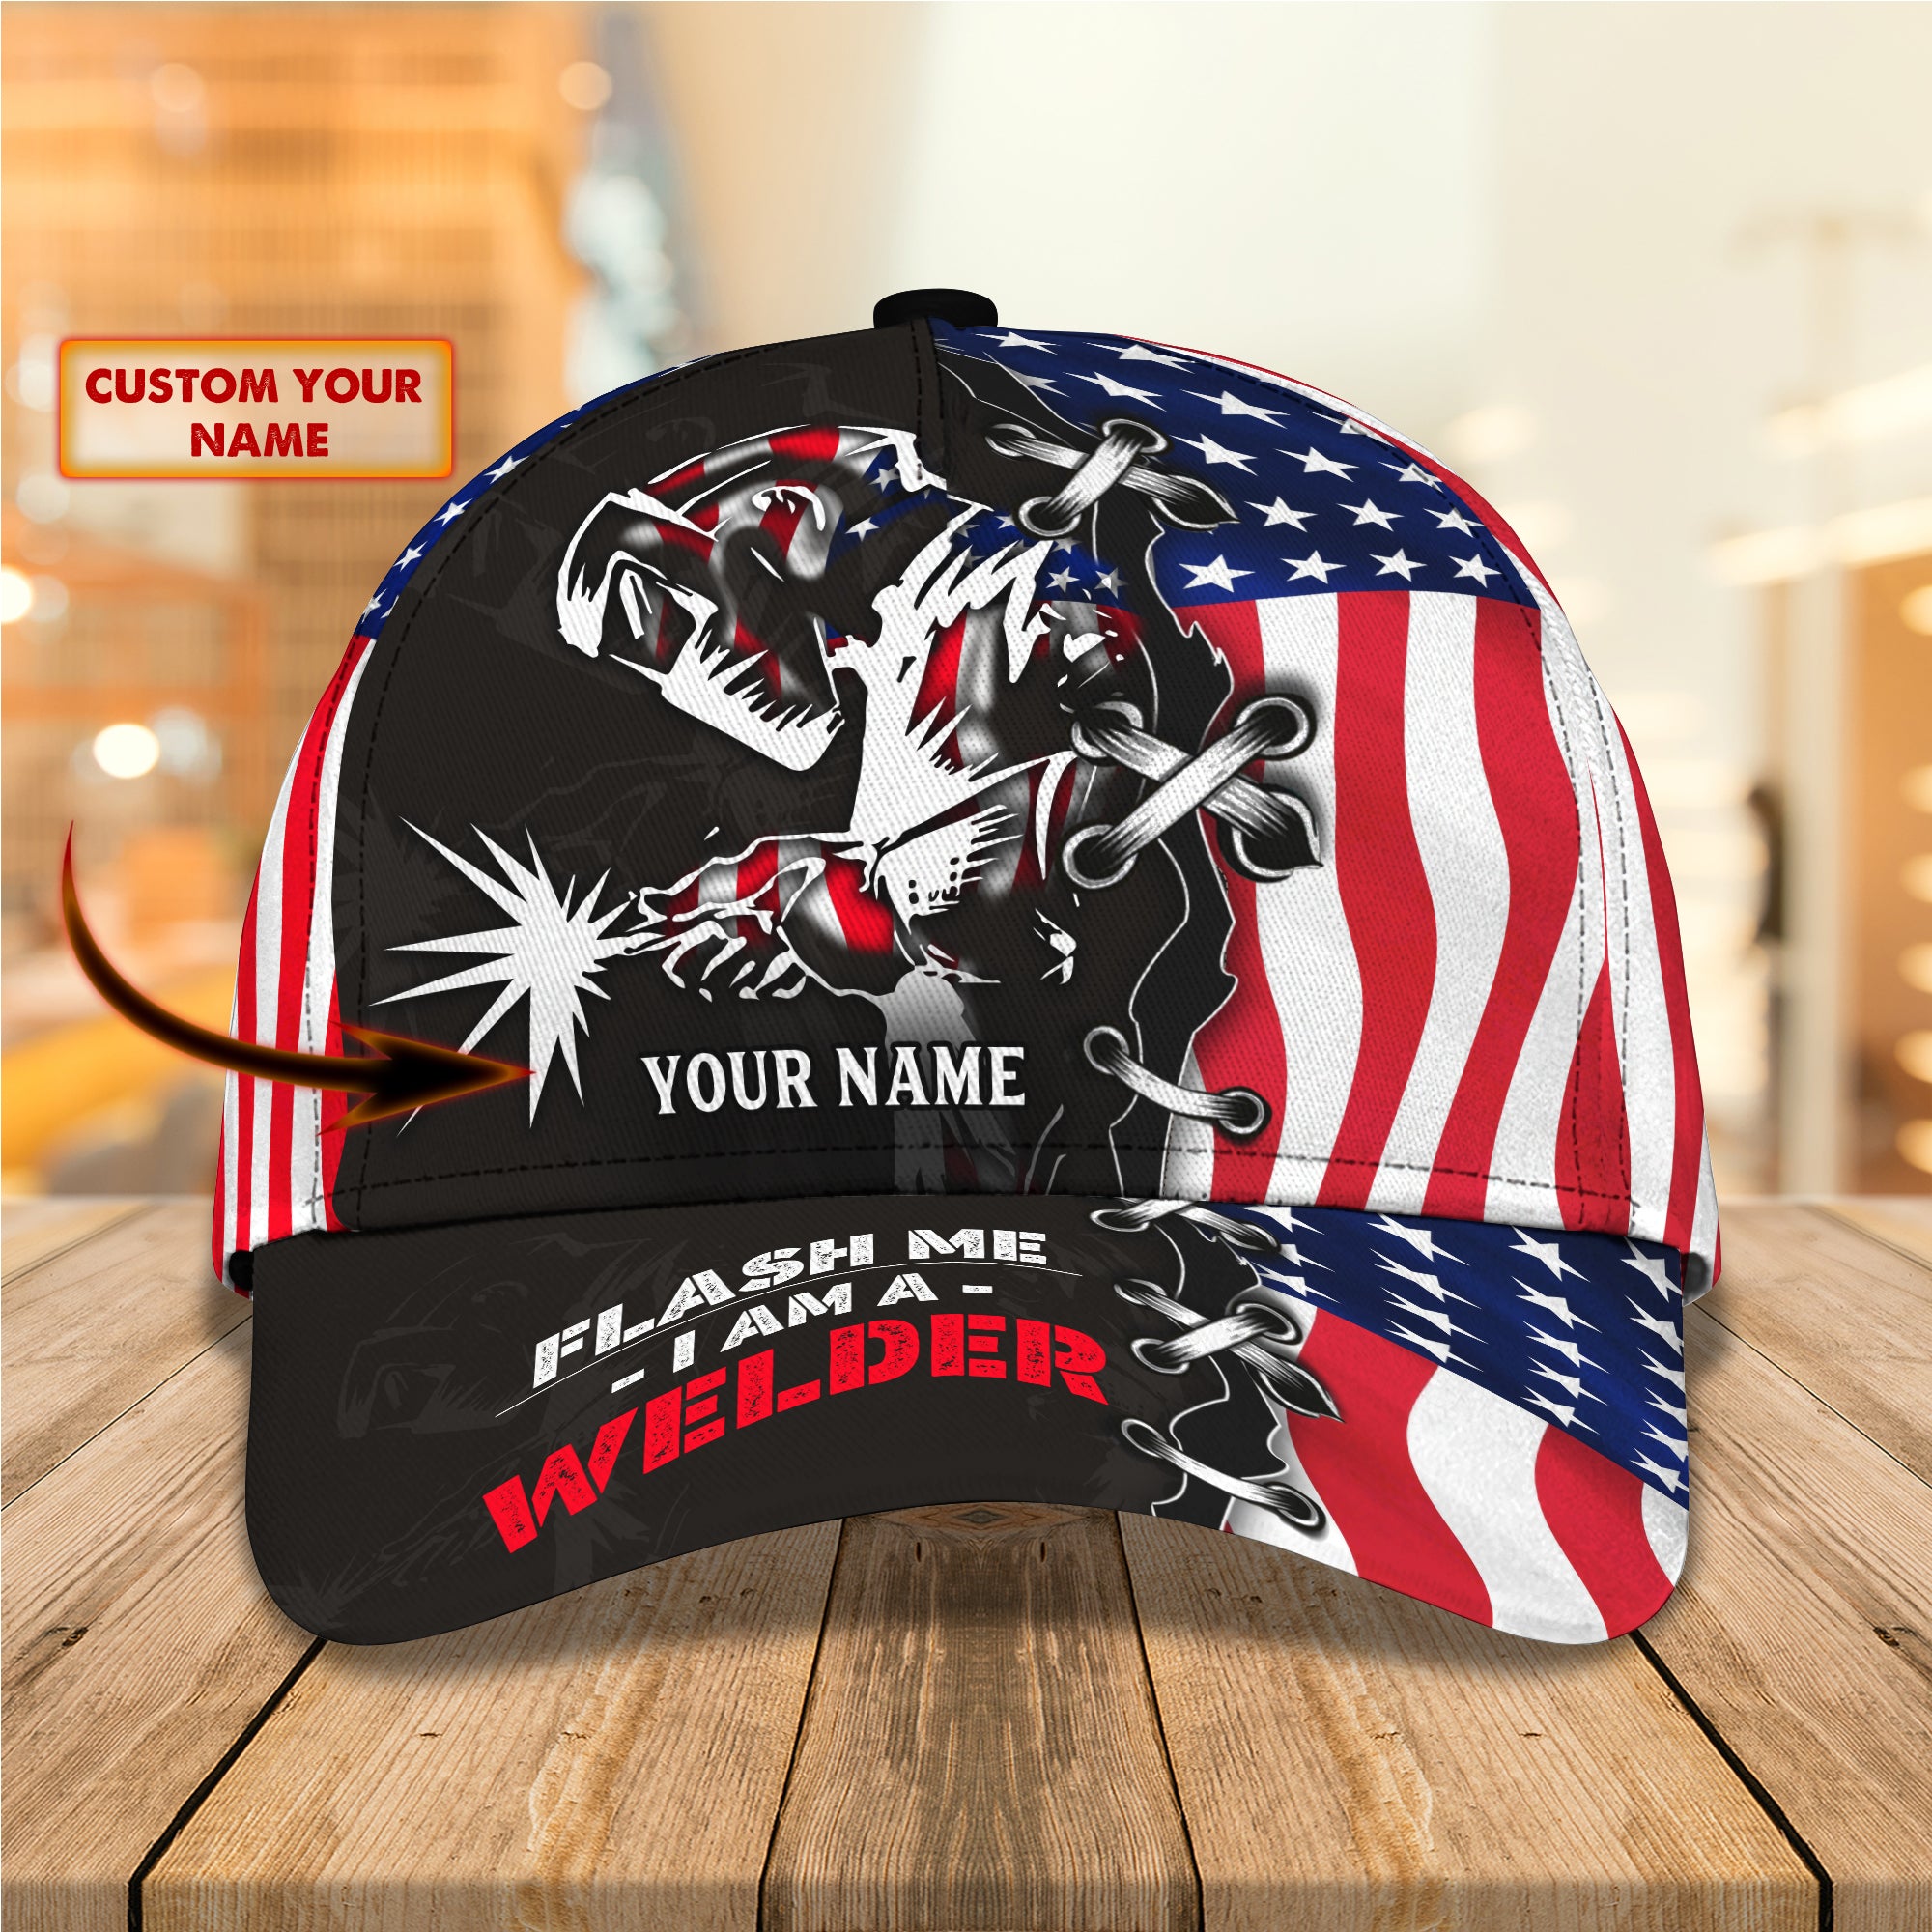 Welder 2 - Personalized Name Cap - tra96